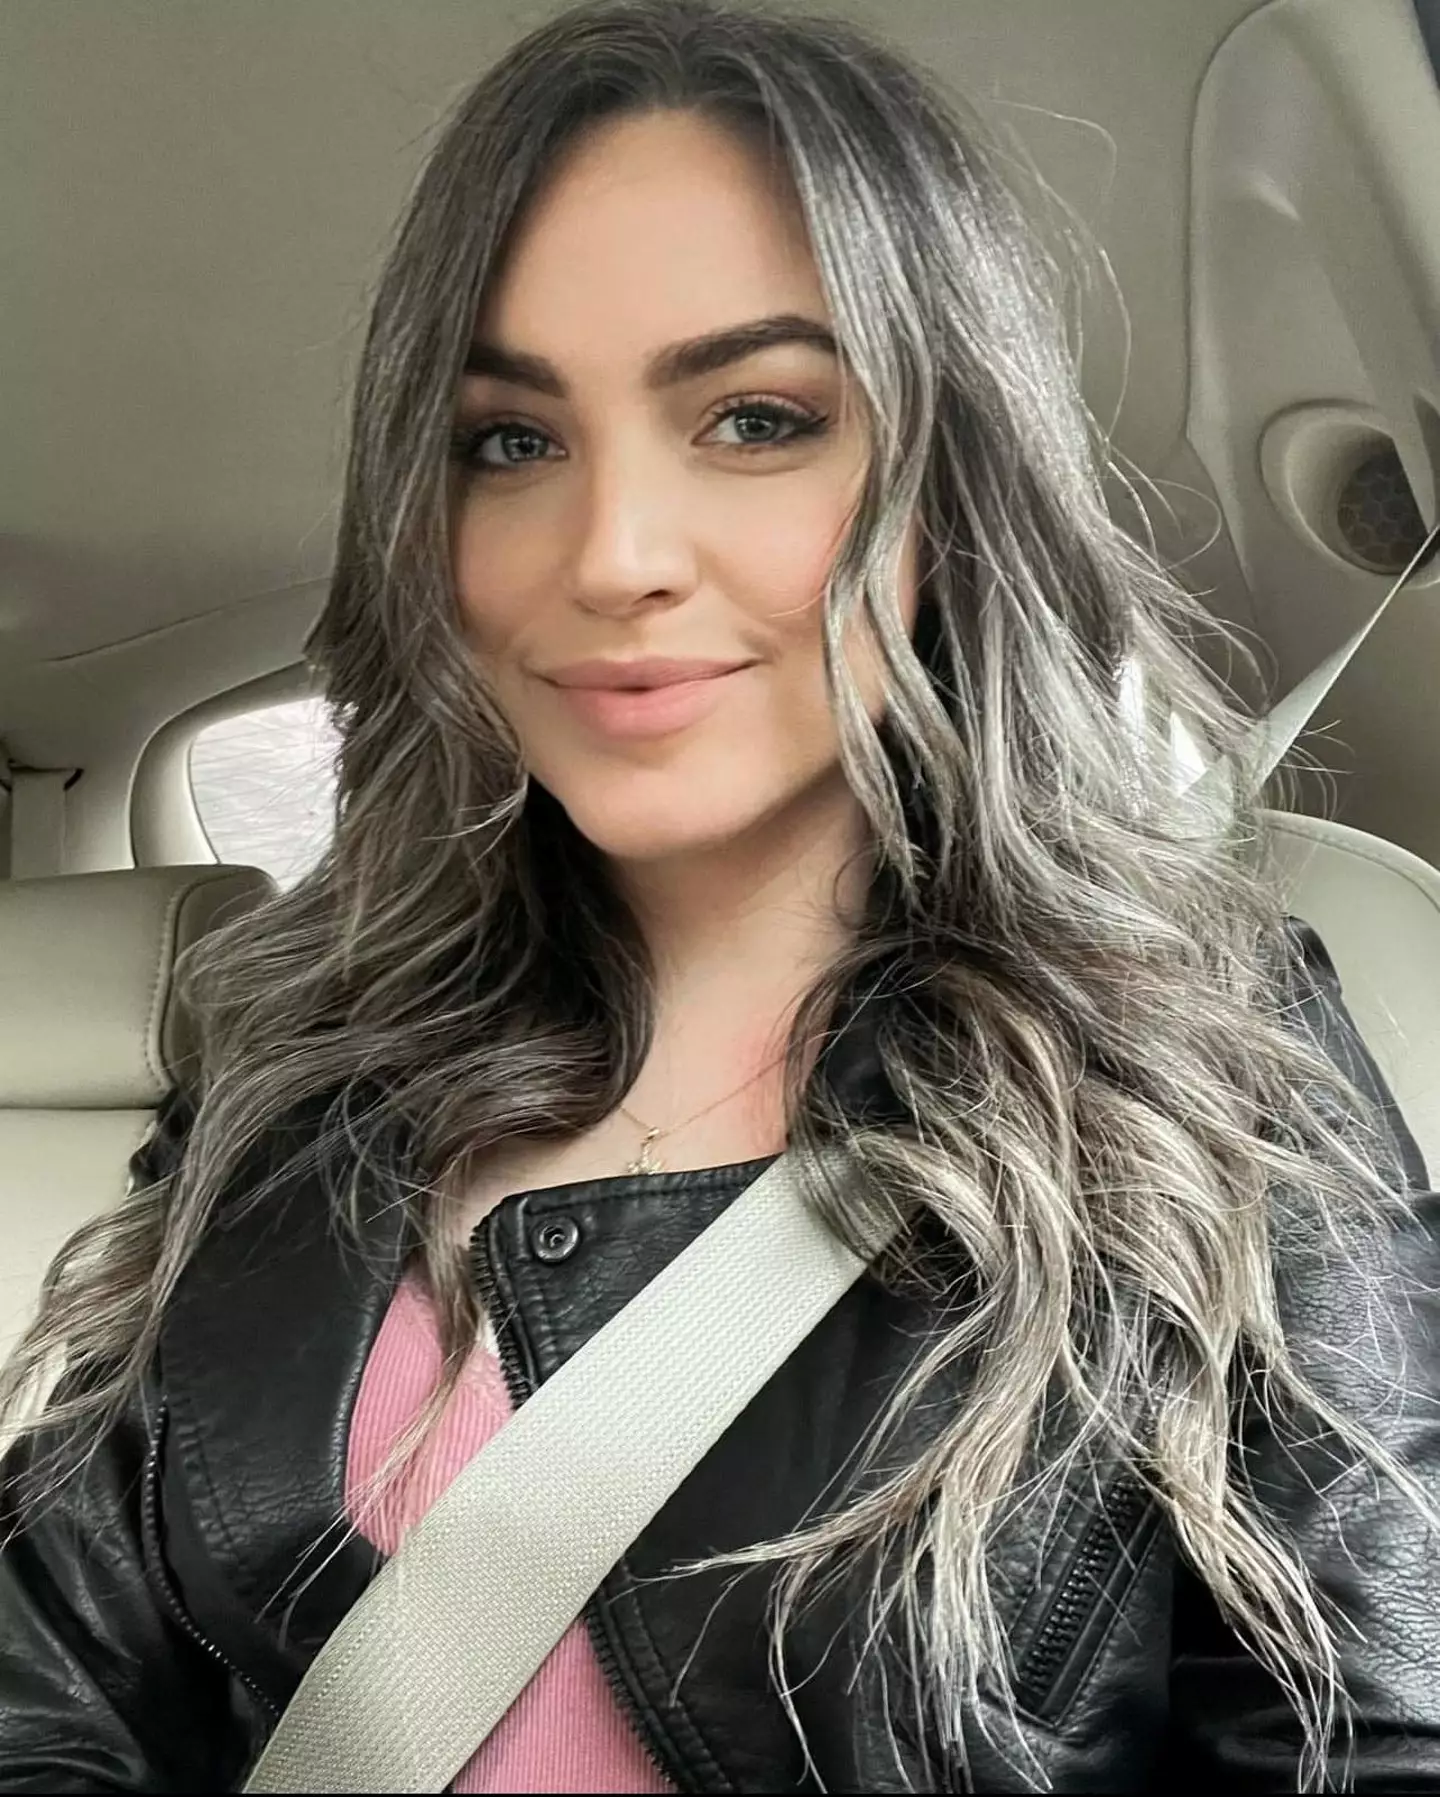 Shannyn Pierce has ditched the dye and embraced her natural grey locks.